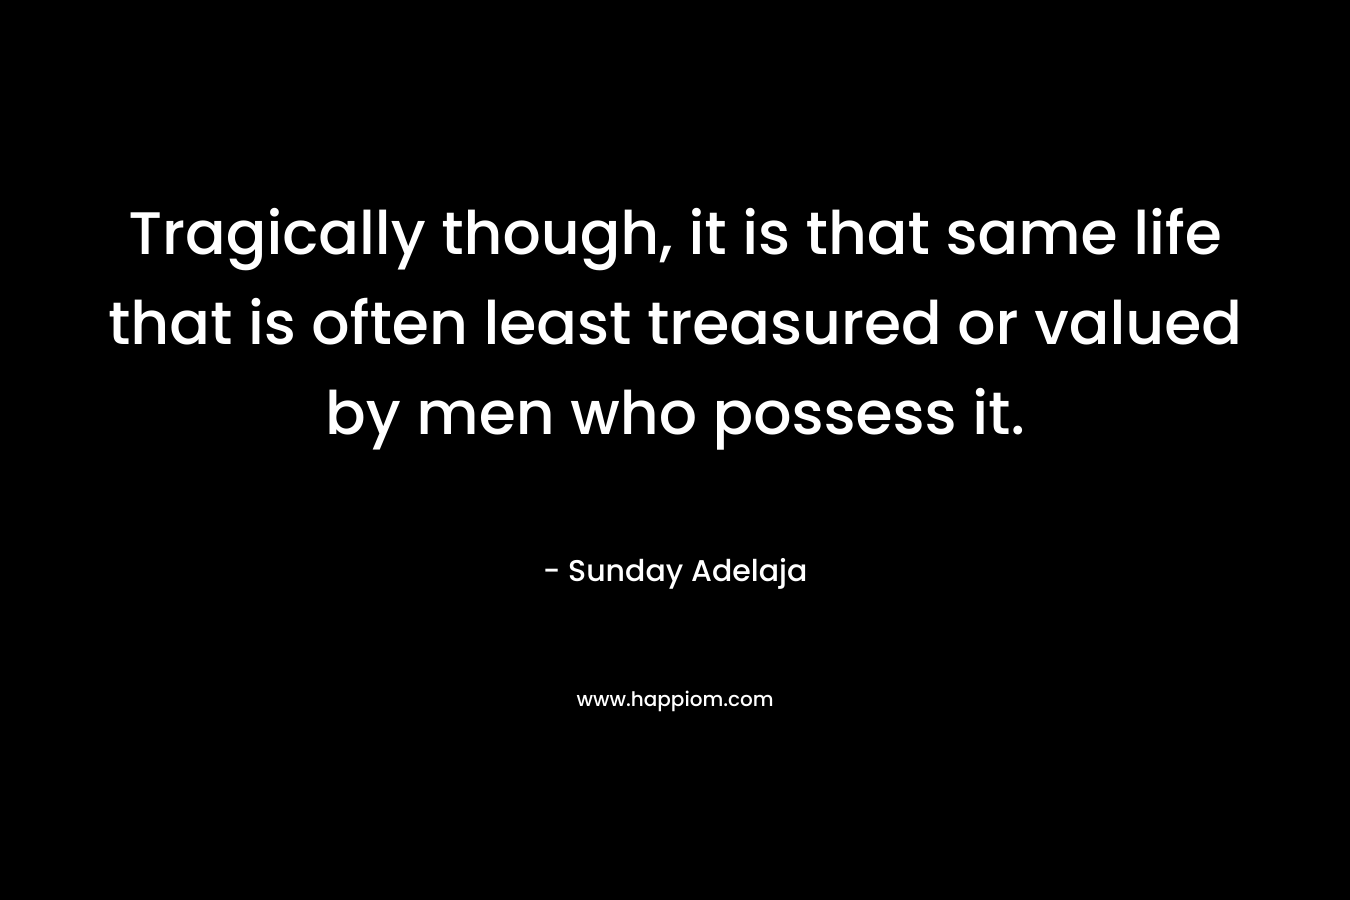 Tragically though, it is that same life that is often least treasured or valued by men who possess it.